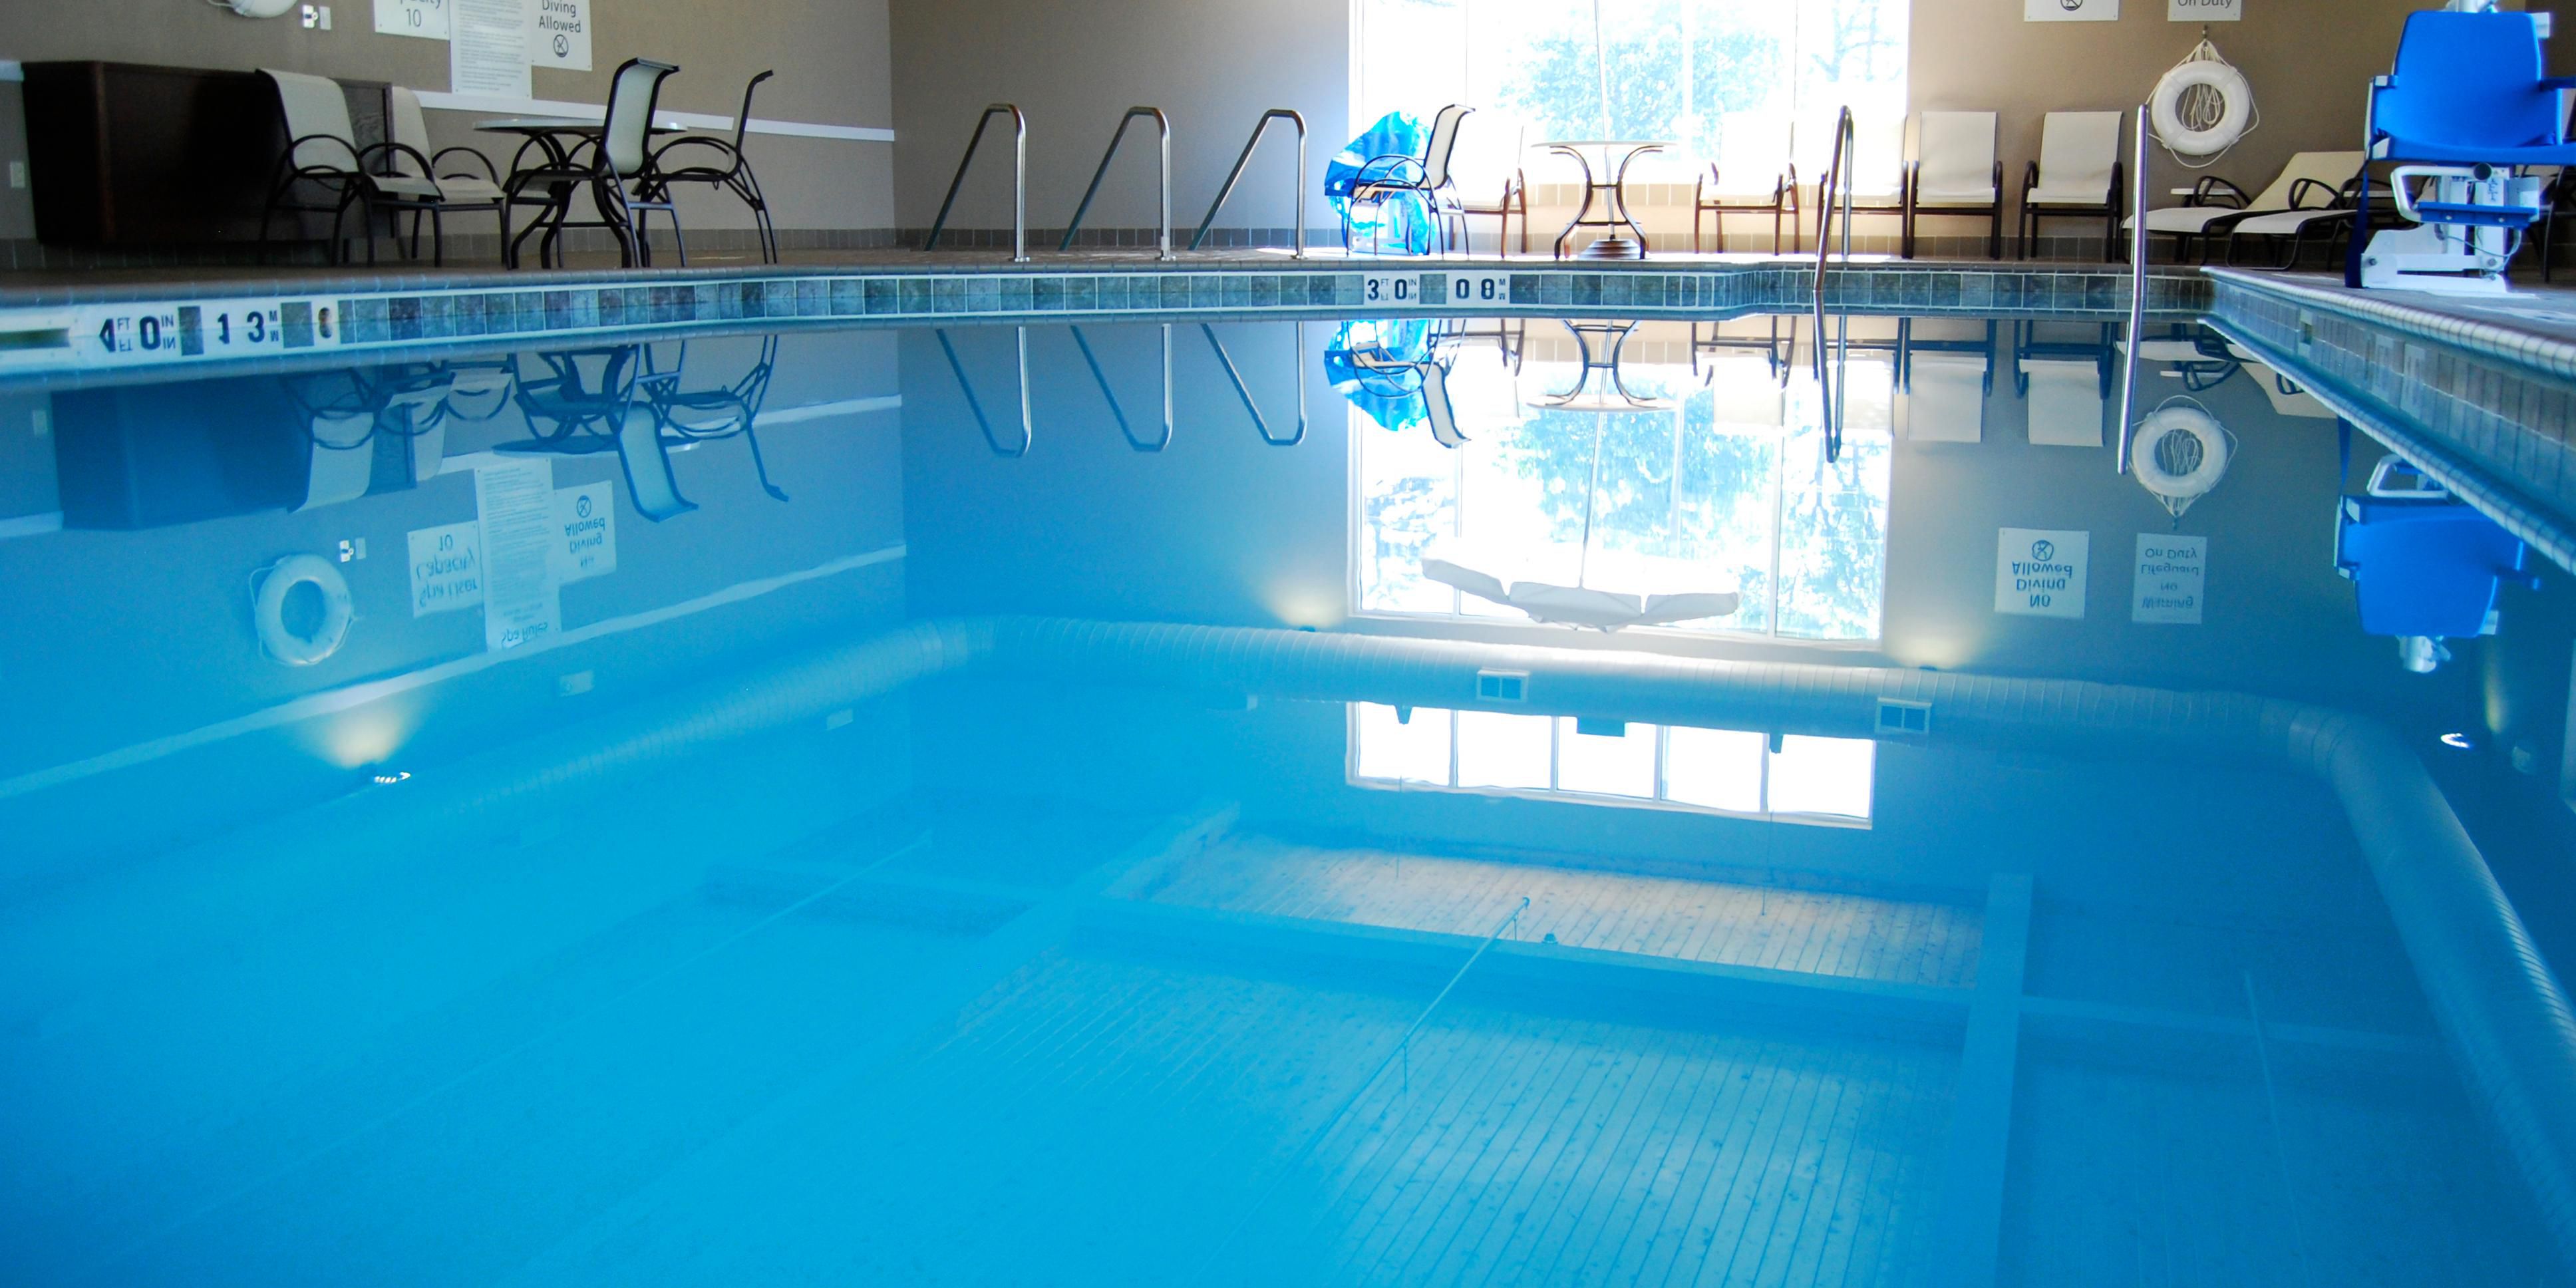 Our pool and whirlpool are open year-round, 8:00AM - 11:00PM.